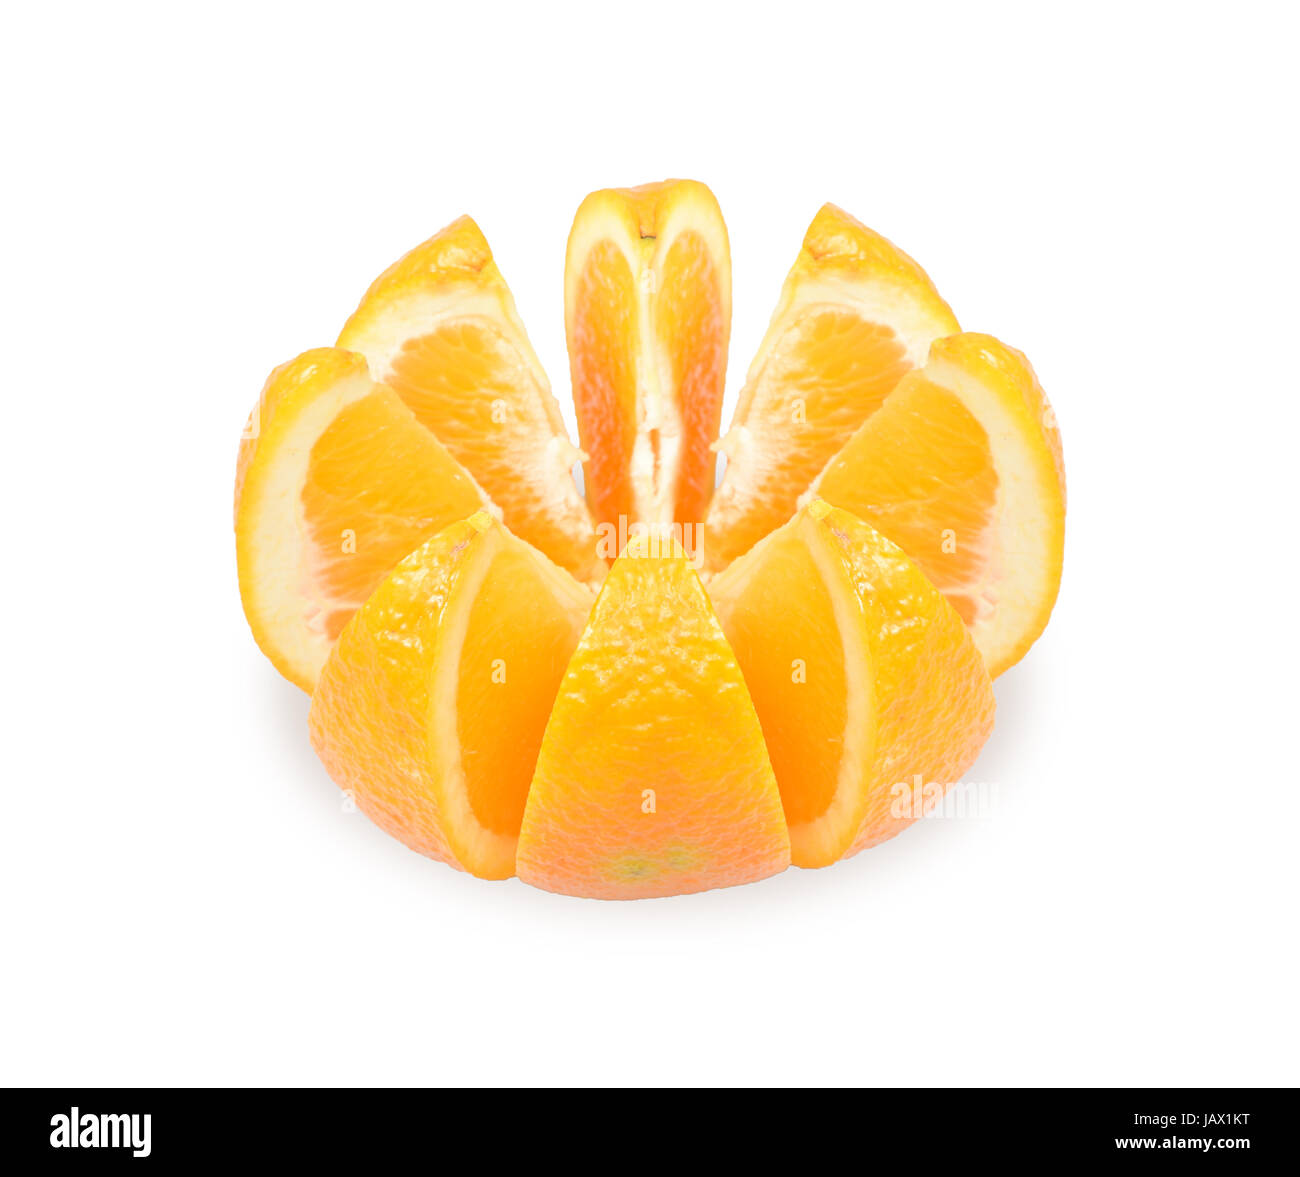 ripe orange cut in slices on a white background Stock Photo